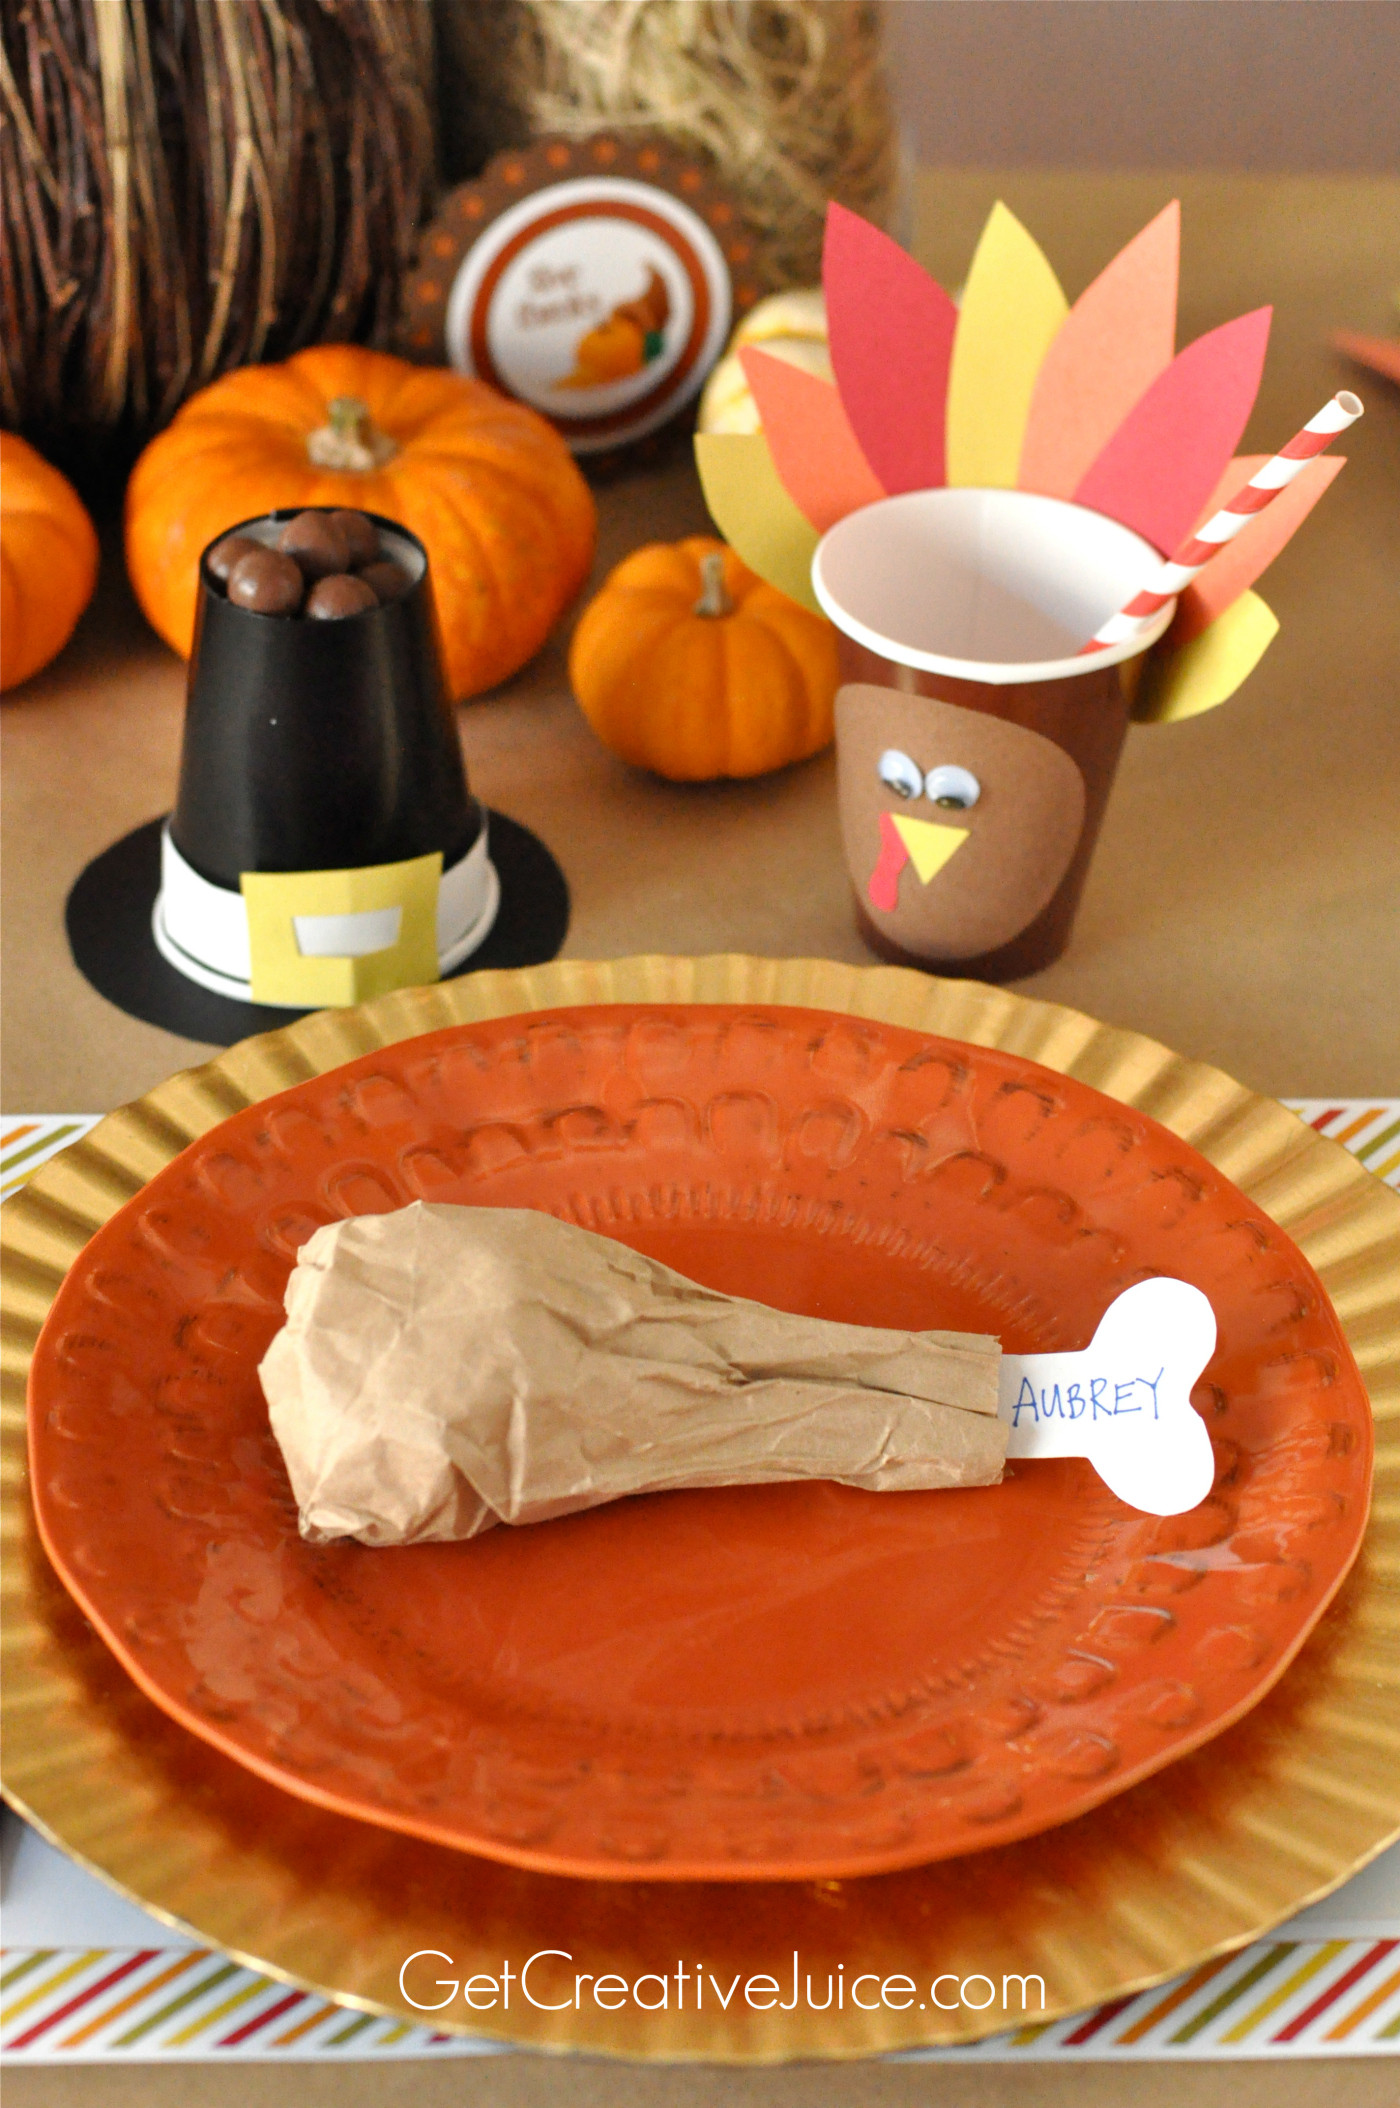 Simple Thanksgiving Table Decorations
 Easy DIY Kids Thanksgiving Table Ideas Creative Juice